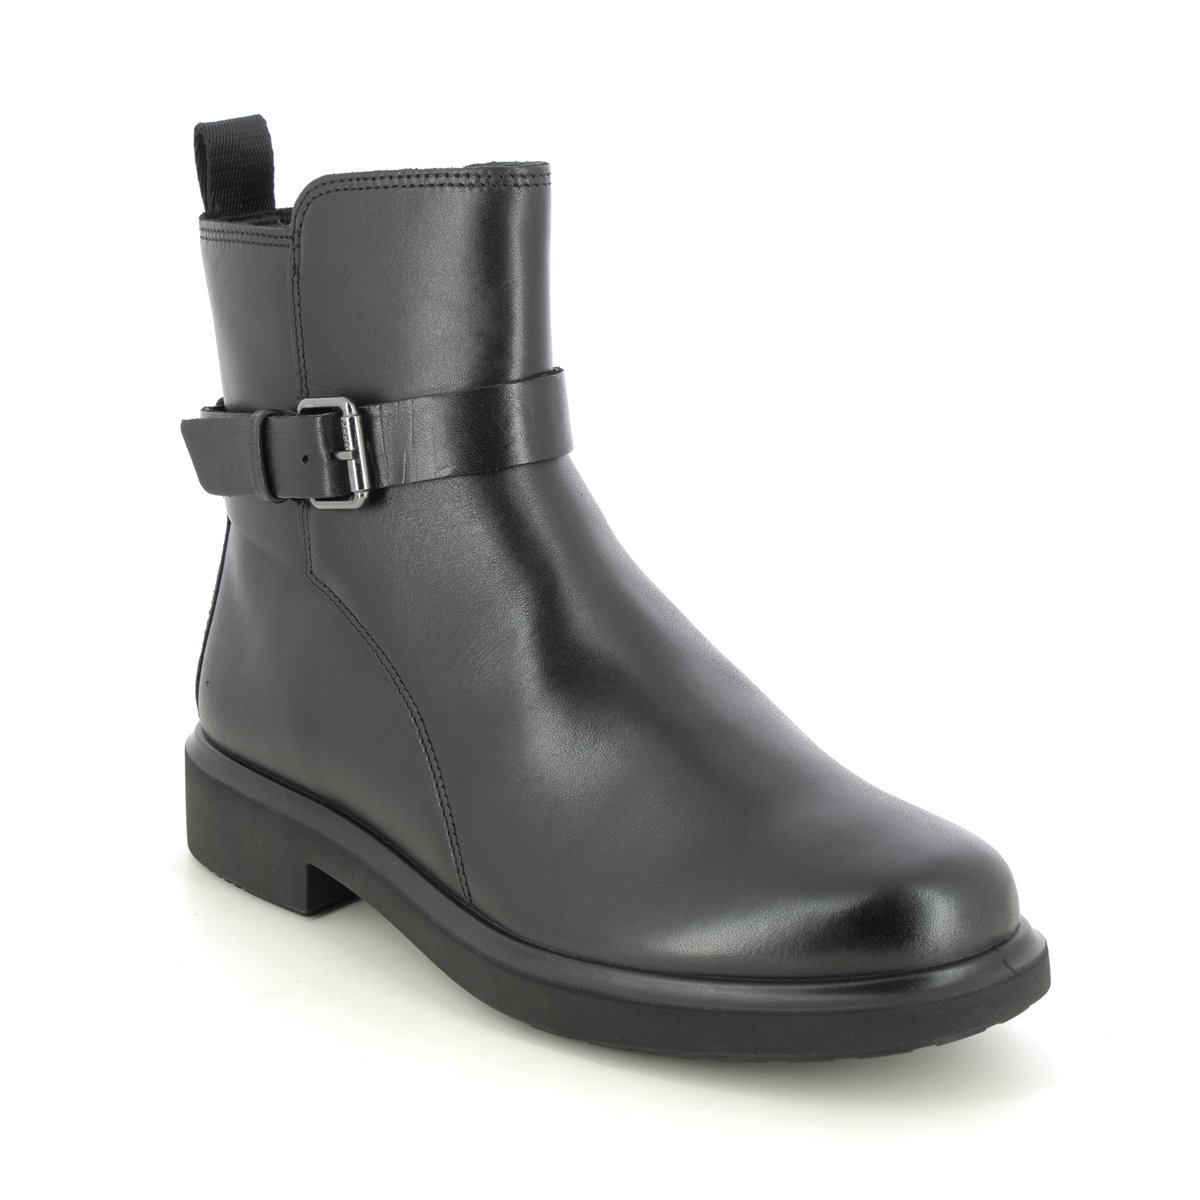 Ecco Amsterdam Tex Metropole Black Leather Womens Ankle Boots 222013-01001 In Size 40 In Plain Black Leather